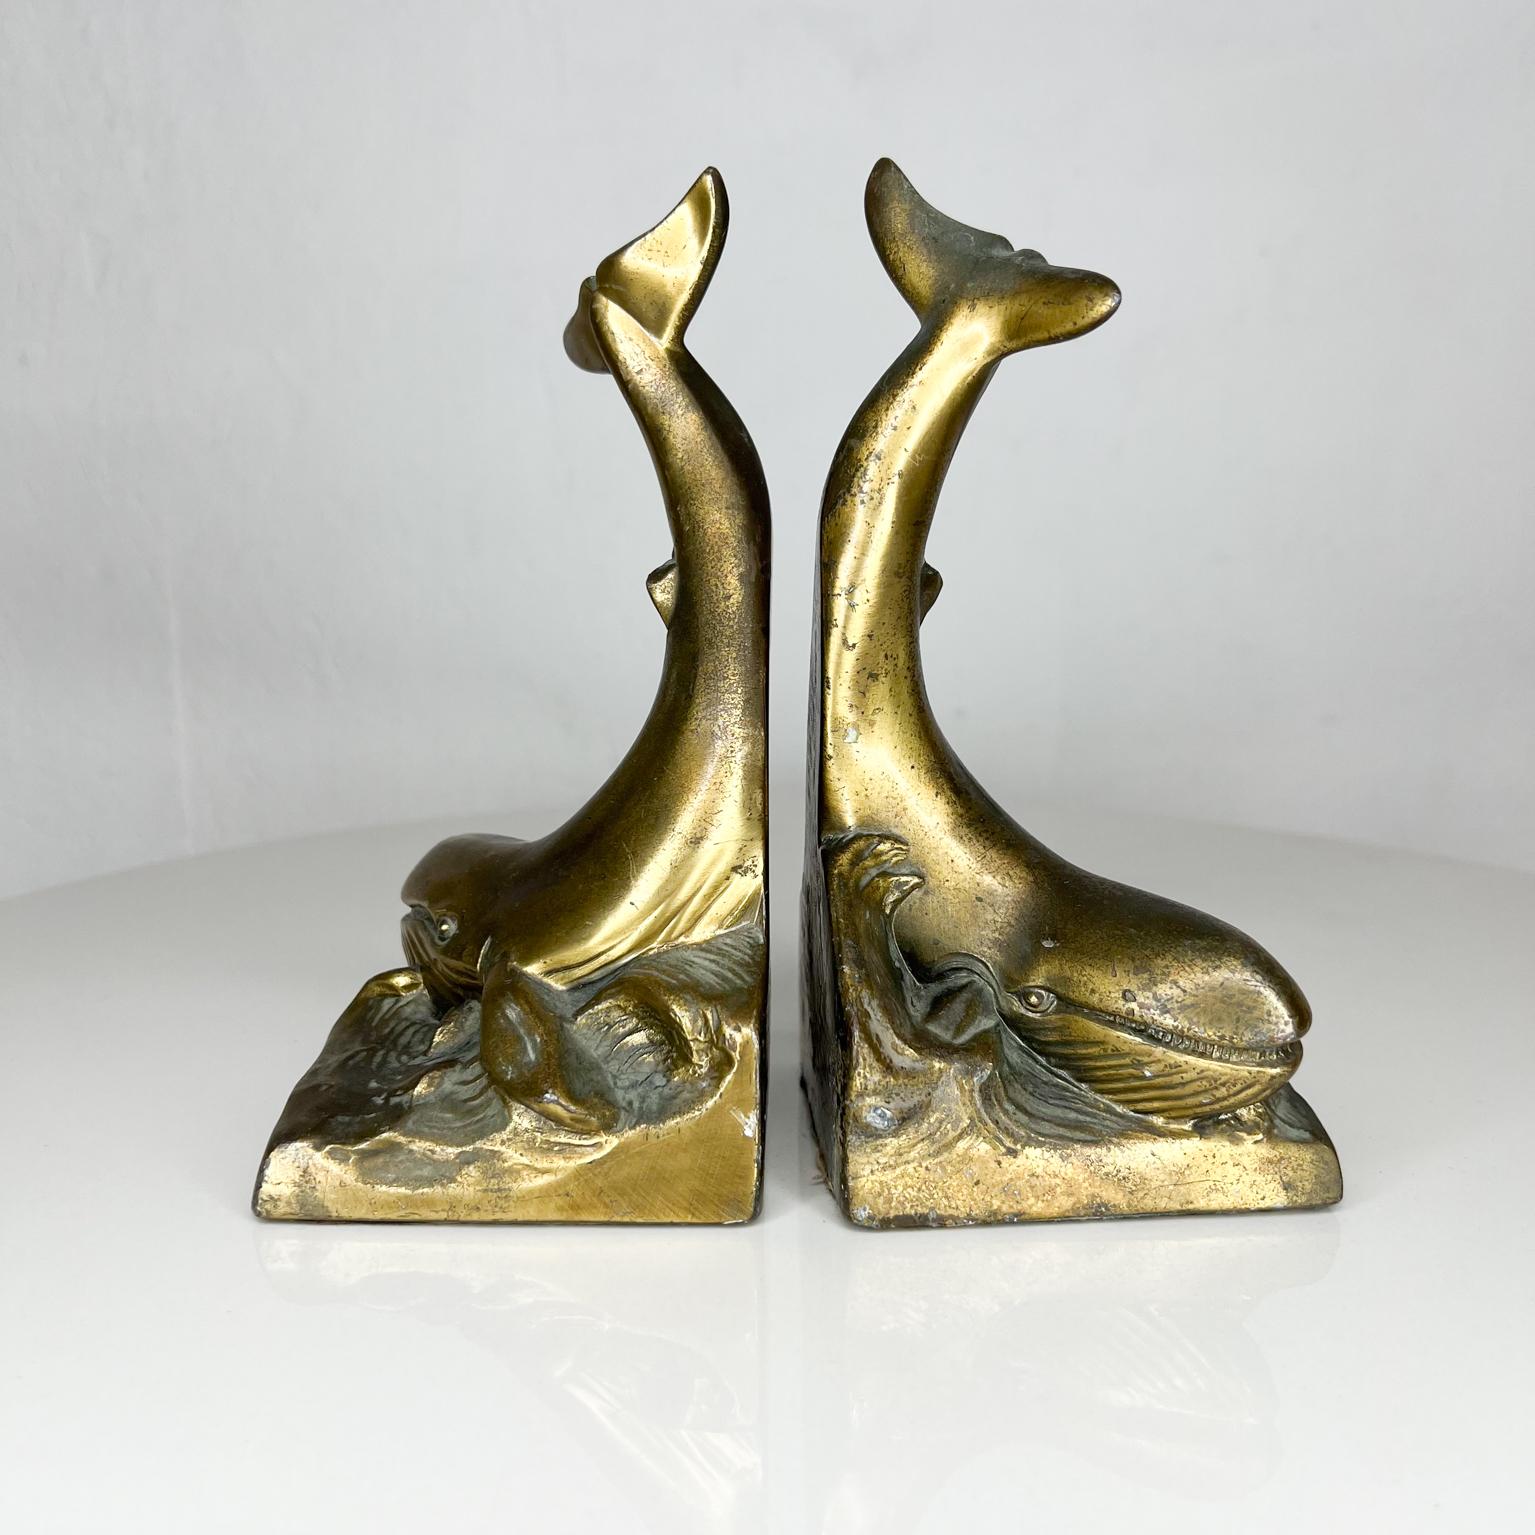 Sculptural Pair of bookends in the shape of a whale. Brass plated metal.
Preowned original vintage condition with imperfections. Sun faded, minor scuffs present.
Patina present.
Refer to images please
No signature or label present from the